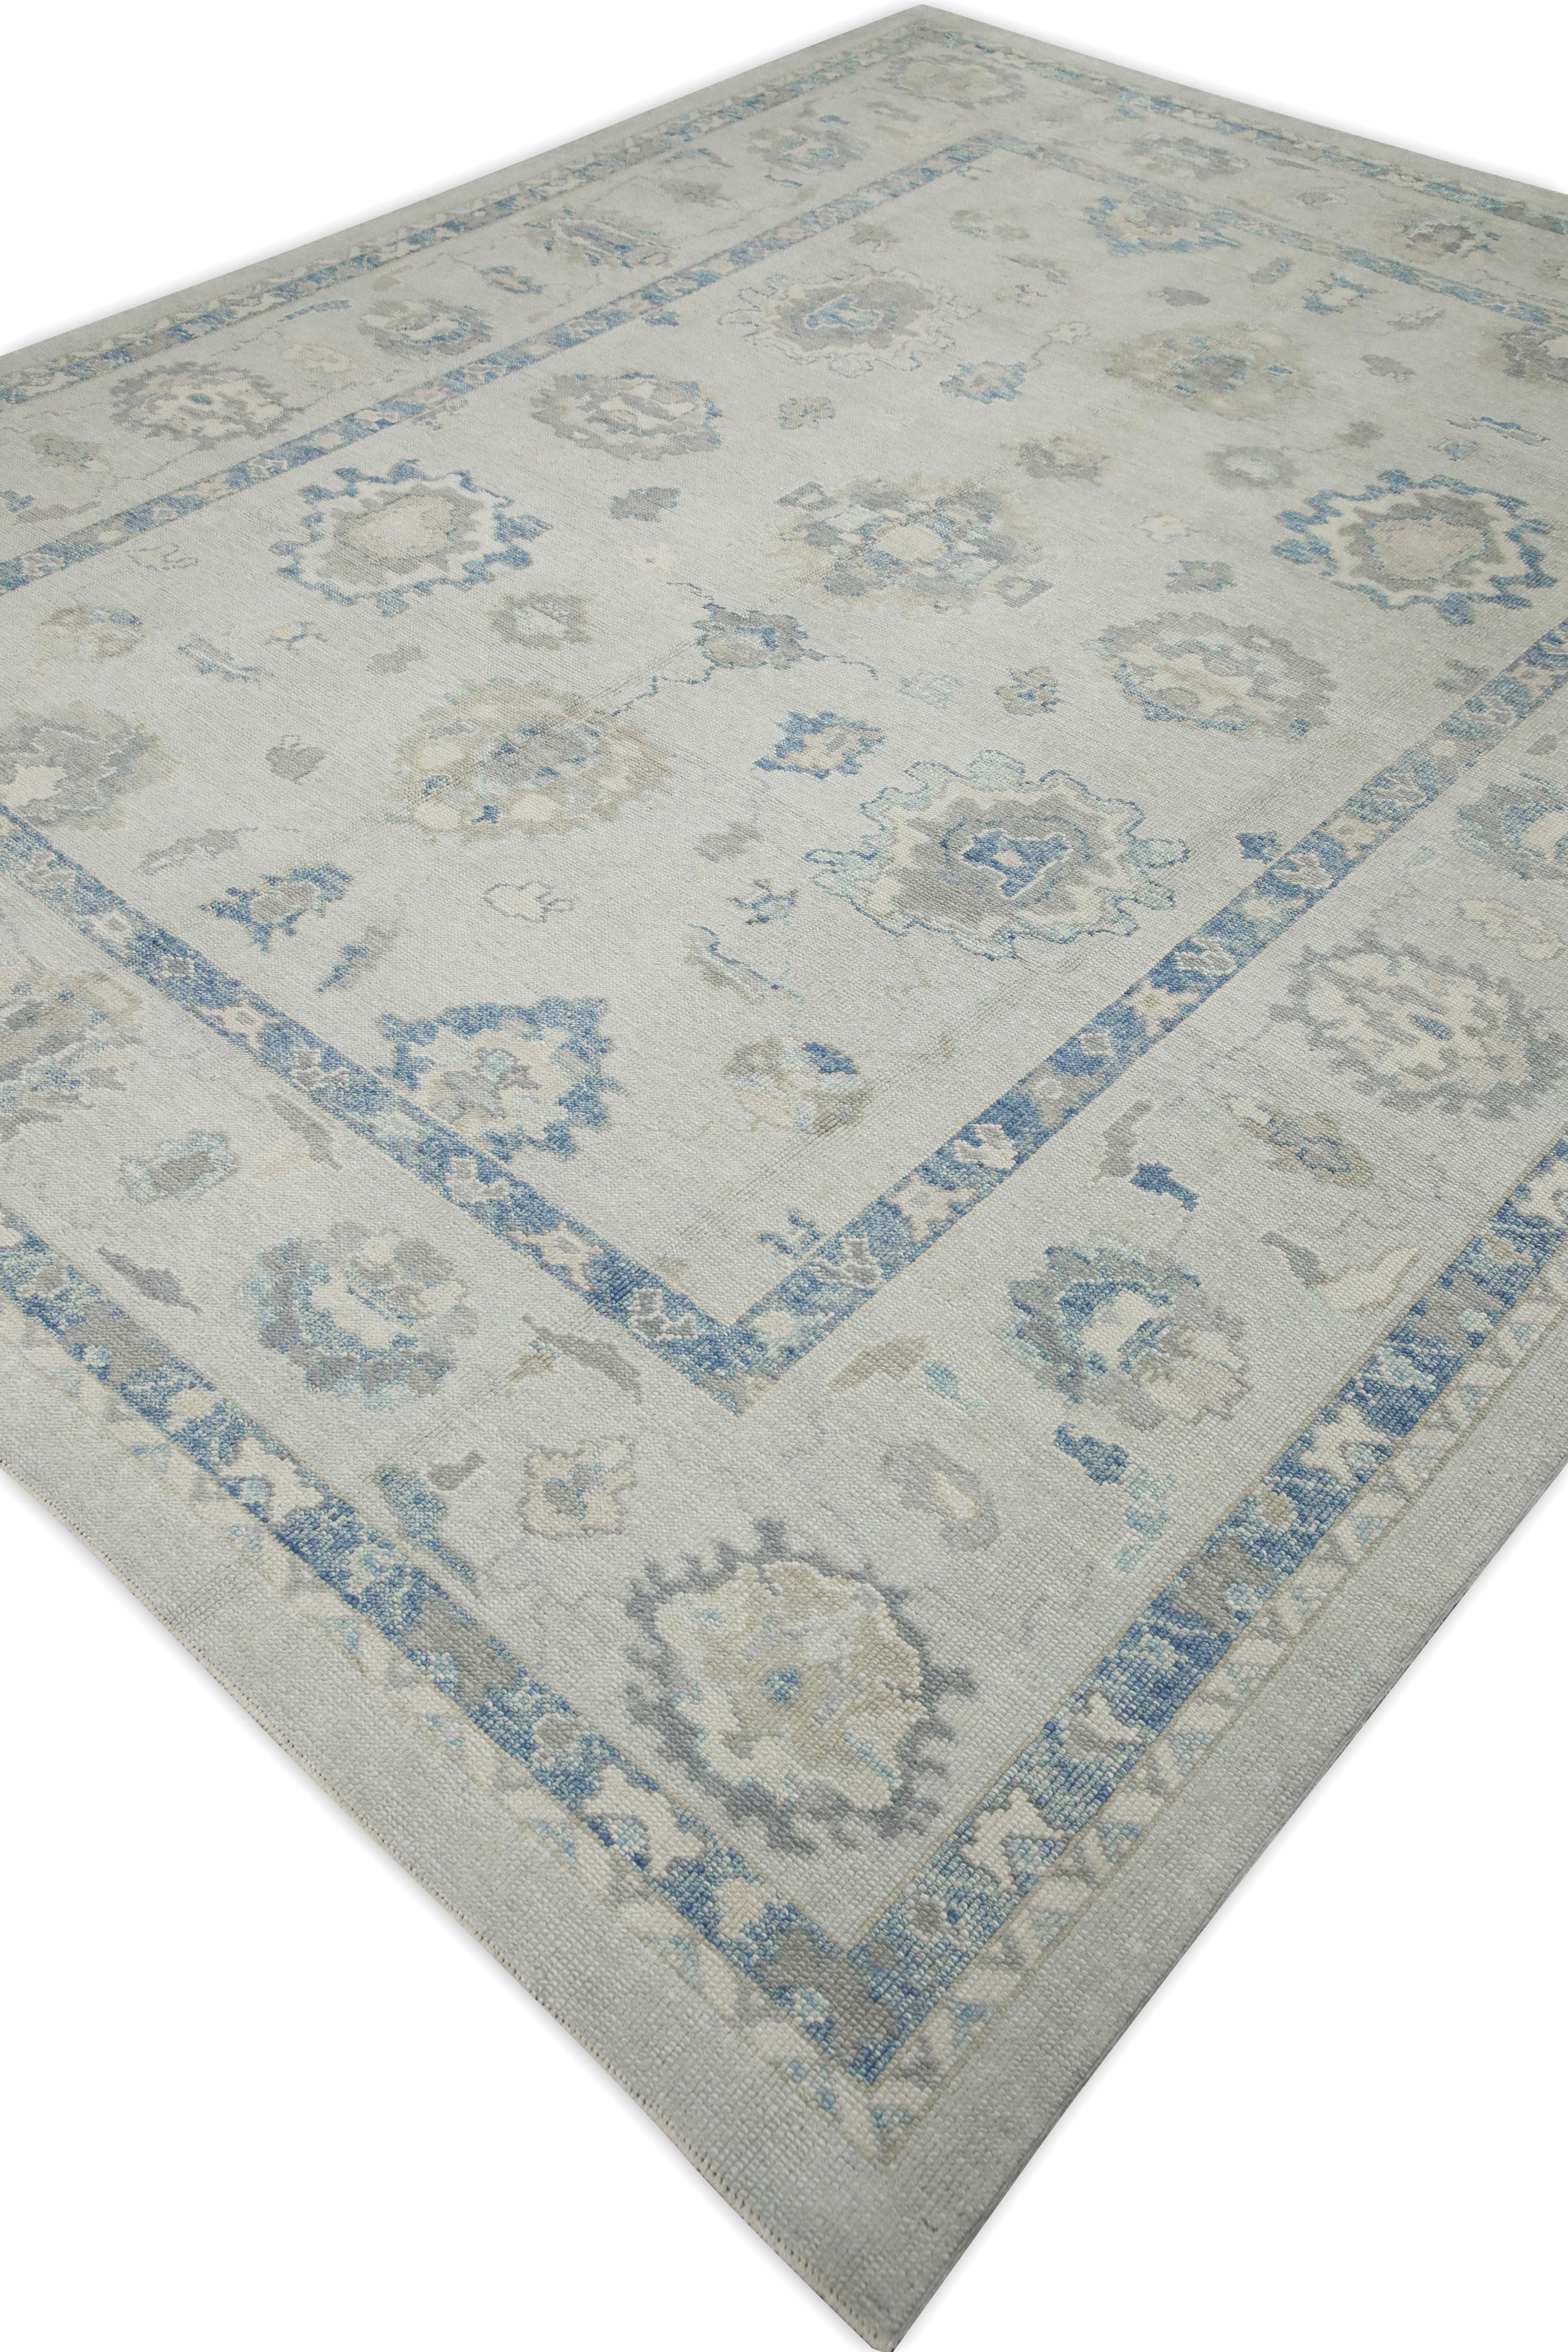 Contemporary Blue Floral Design Handwoven Wool Turkish Oushak Rug 9'4